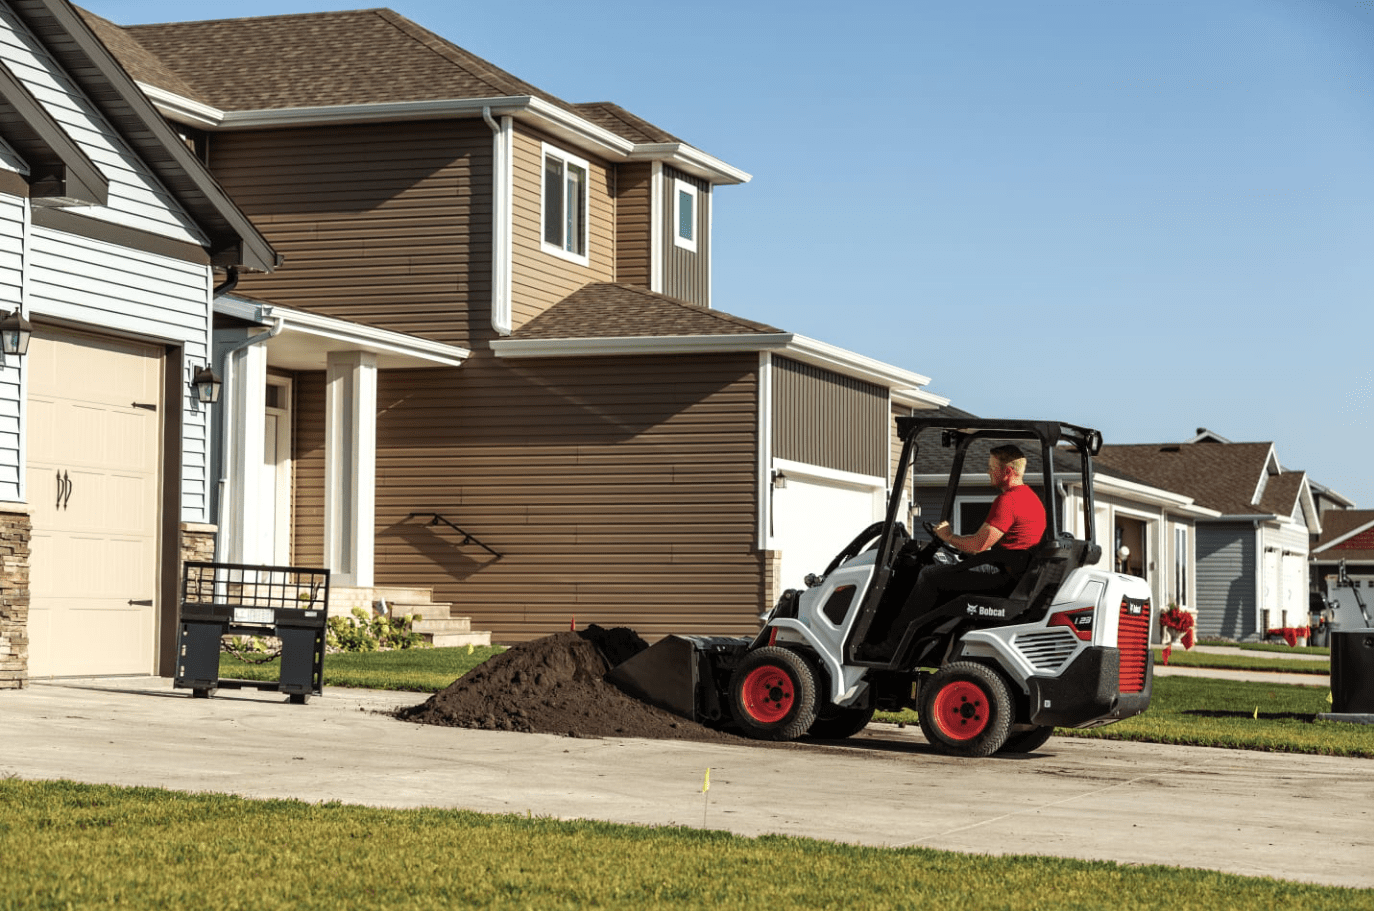 Browse Specs and more for the Bobcat L23 Small Articulated Loader - Bobcat of Indy